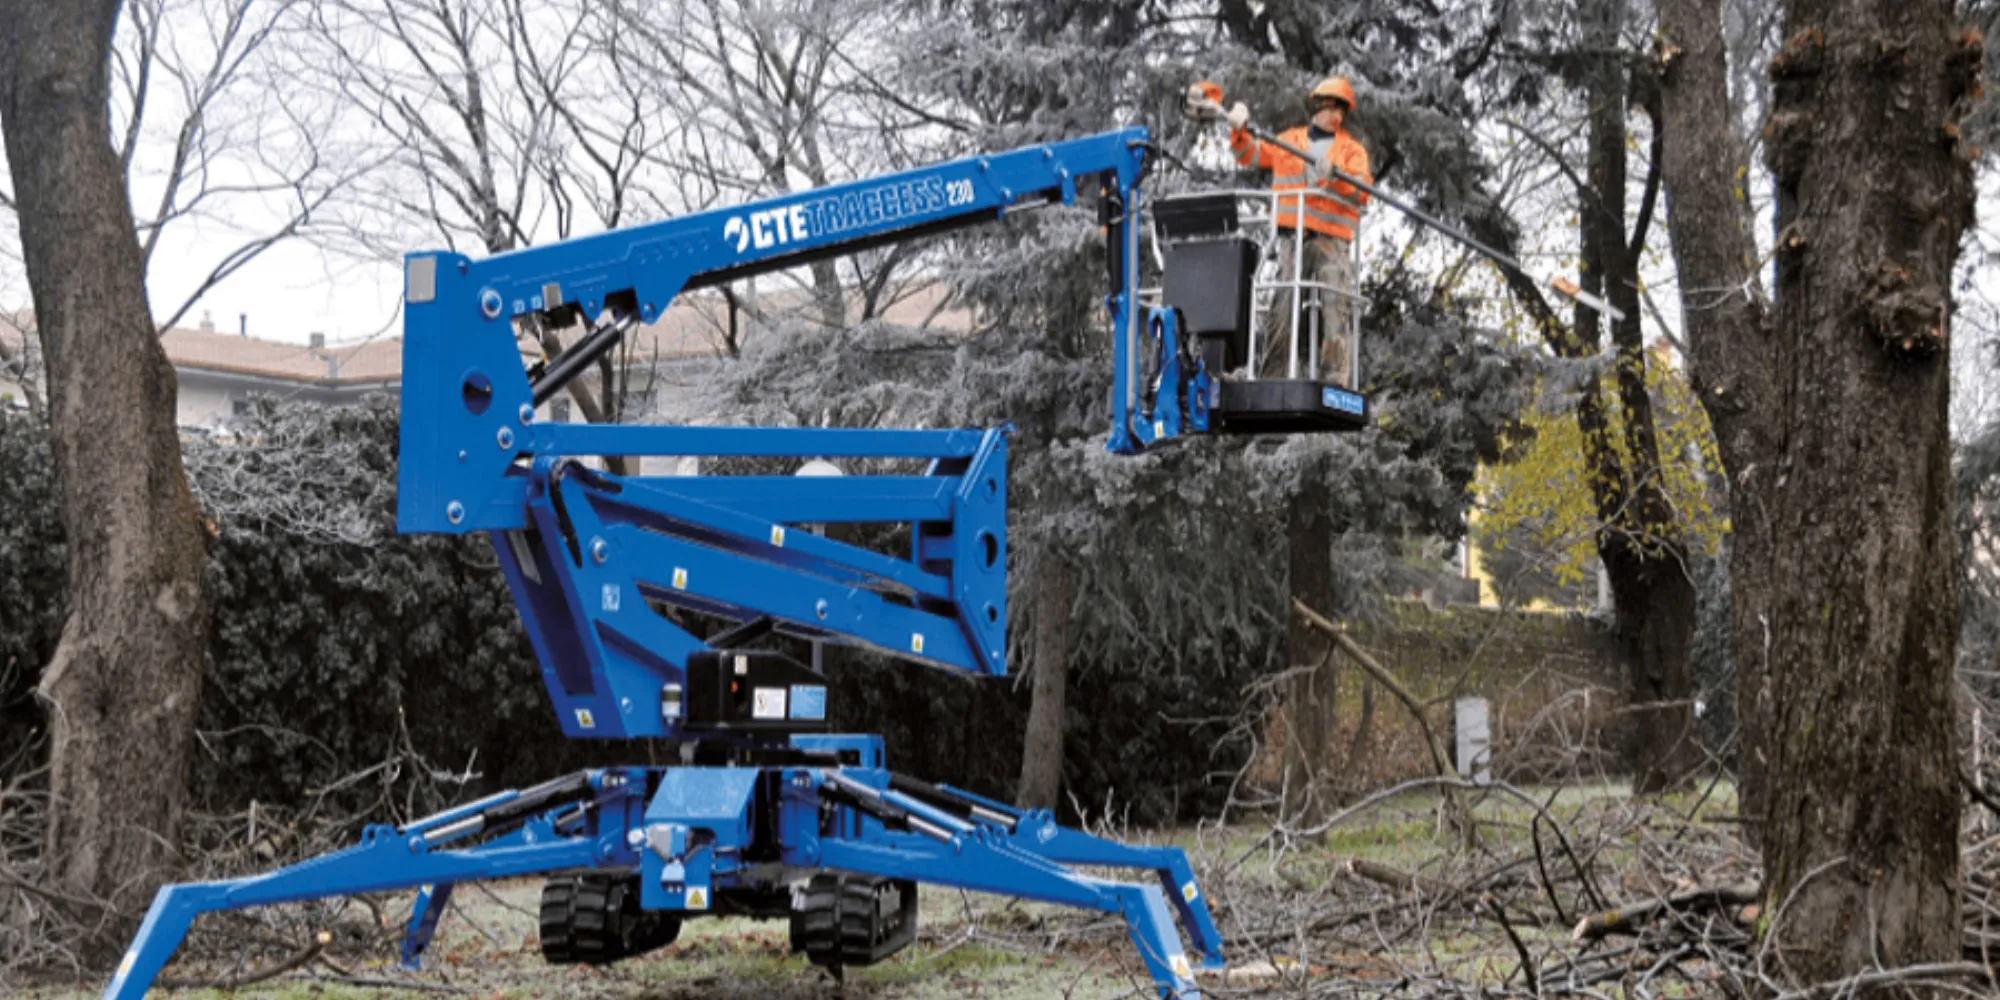 Tracked Spider Boom addition to Safe Hire's Access gear fleet.